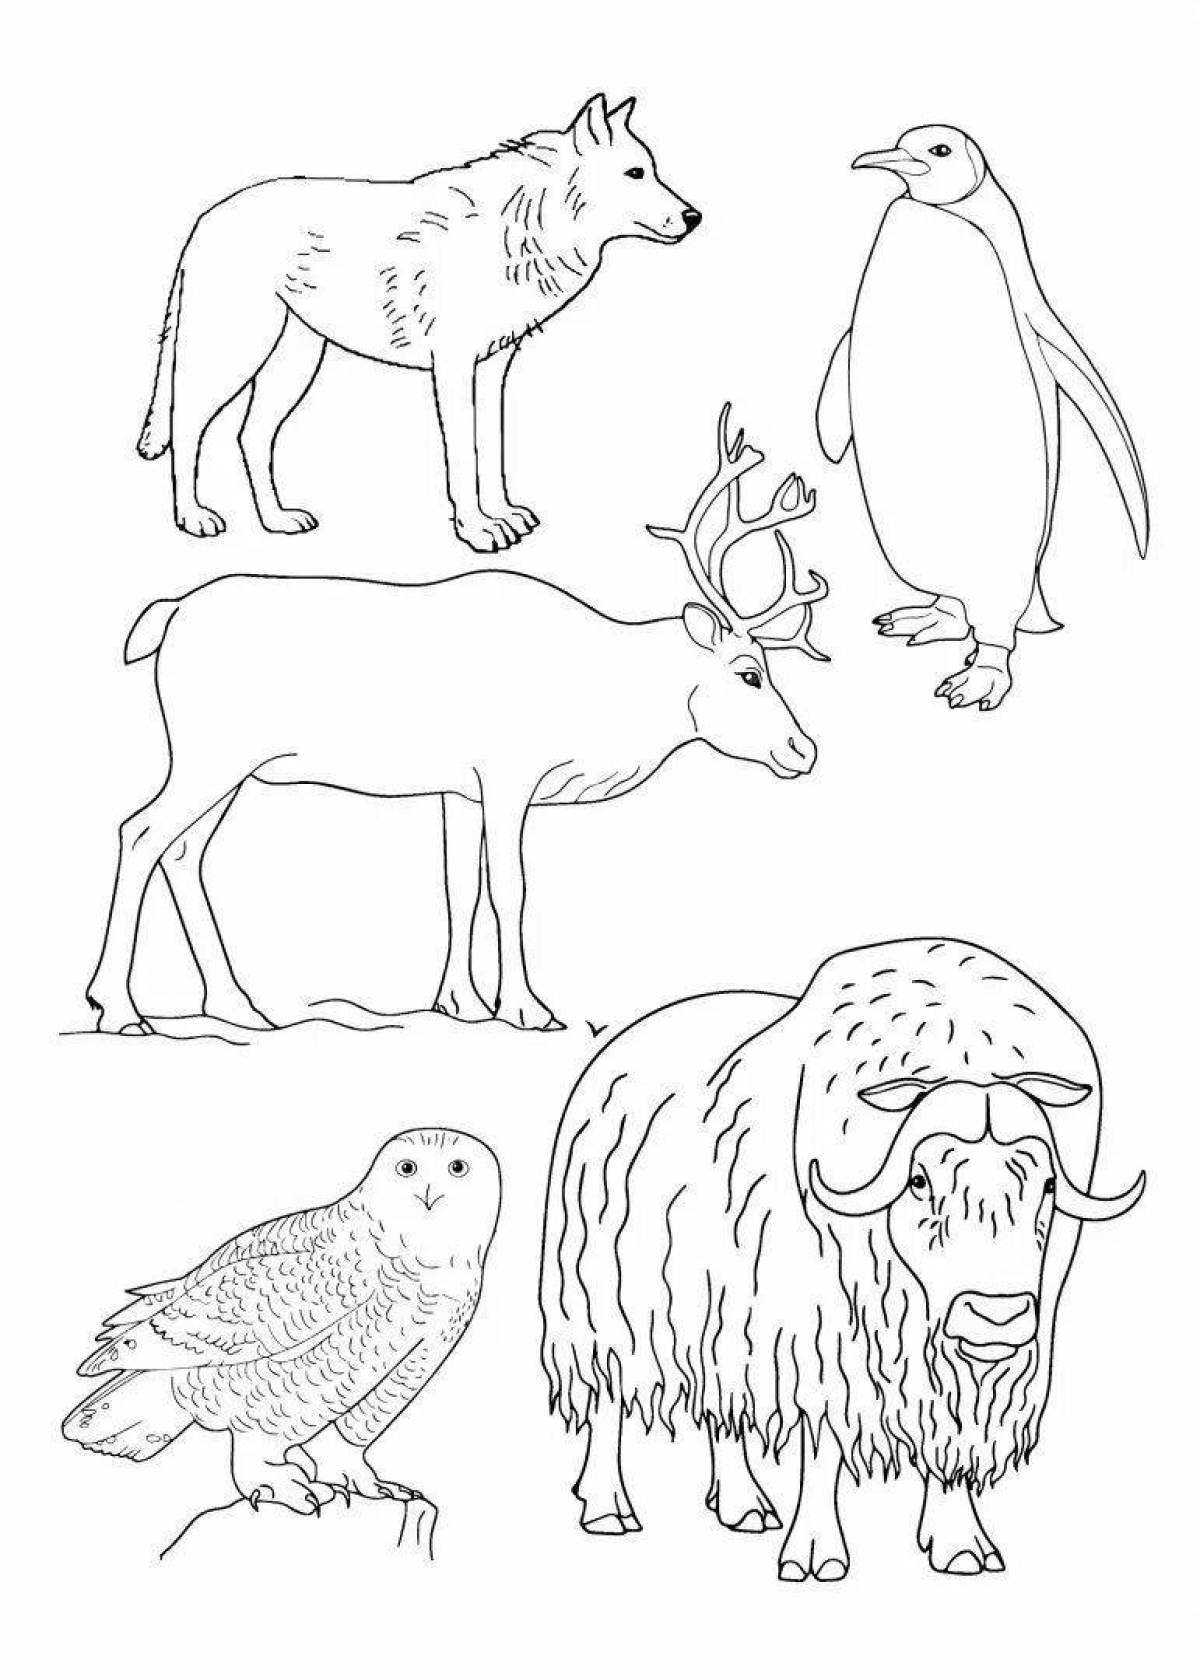 Amazing coloring book for children 4-5 years old animals of the north